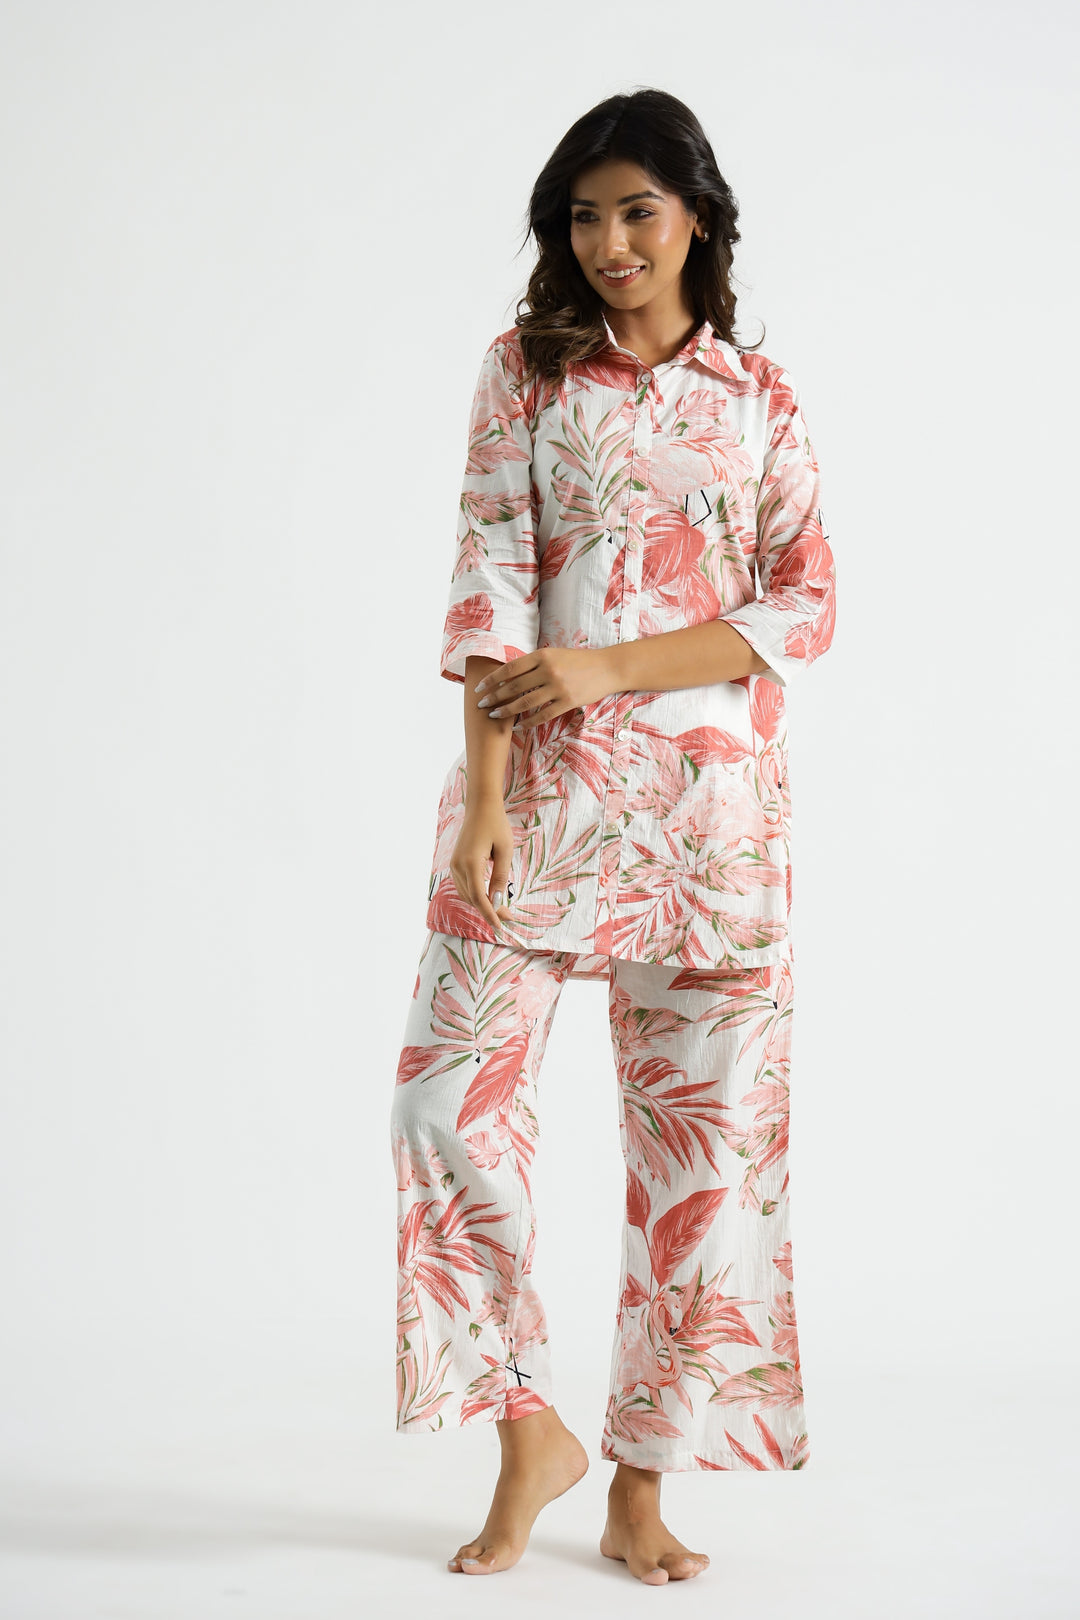 Pink Flamingo Collared Cotton Lounge Co-Ord Set with 7 button